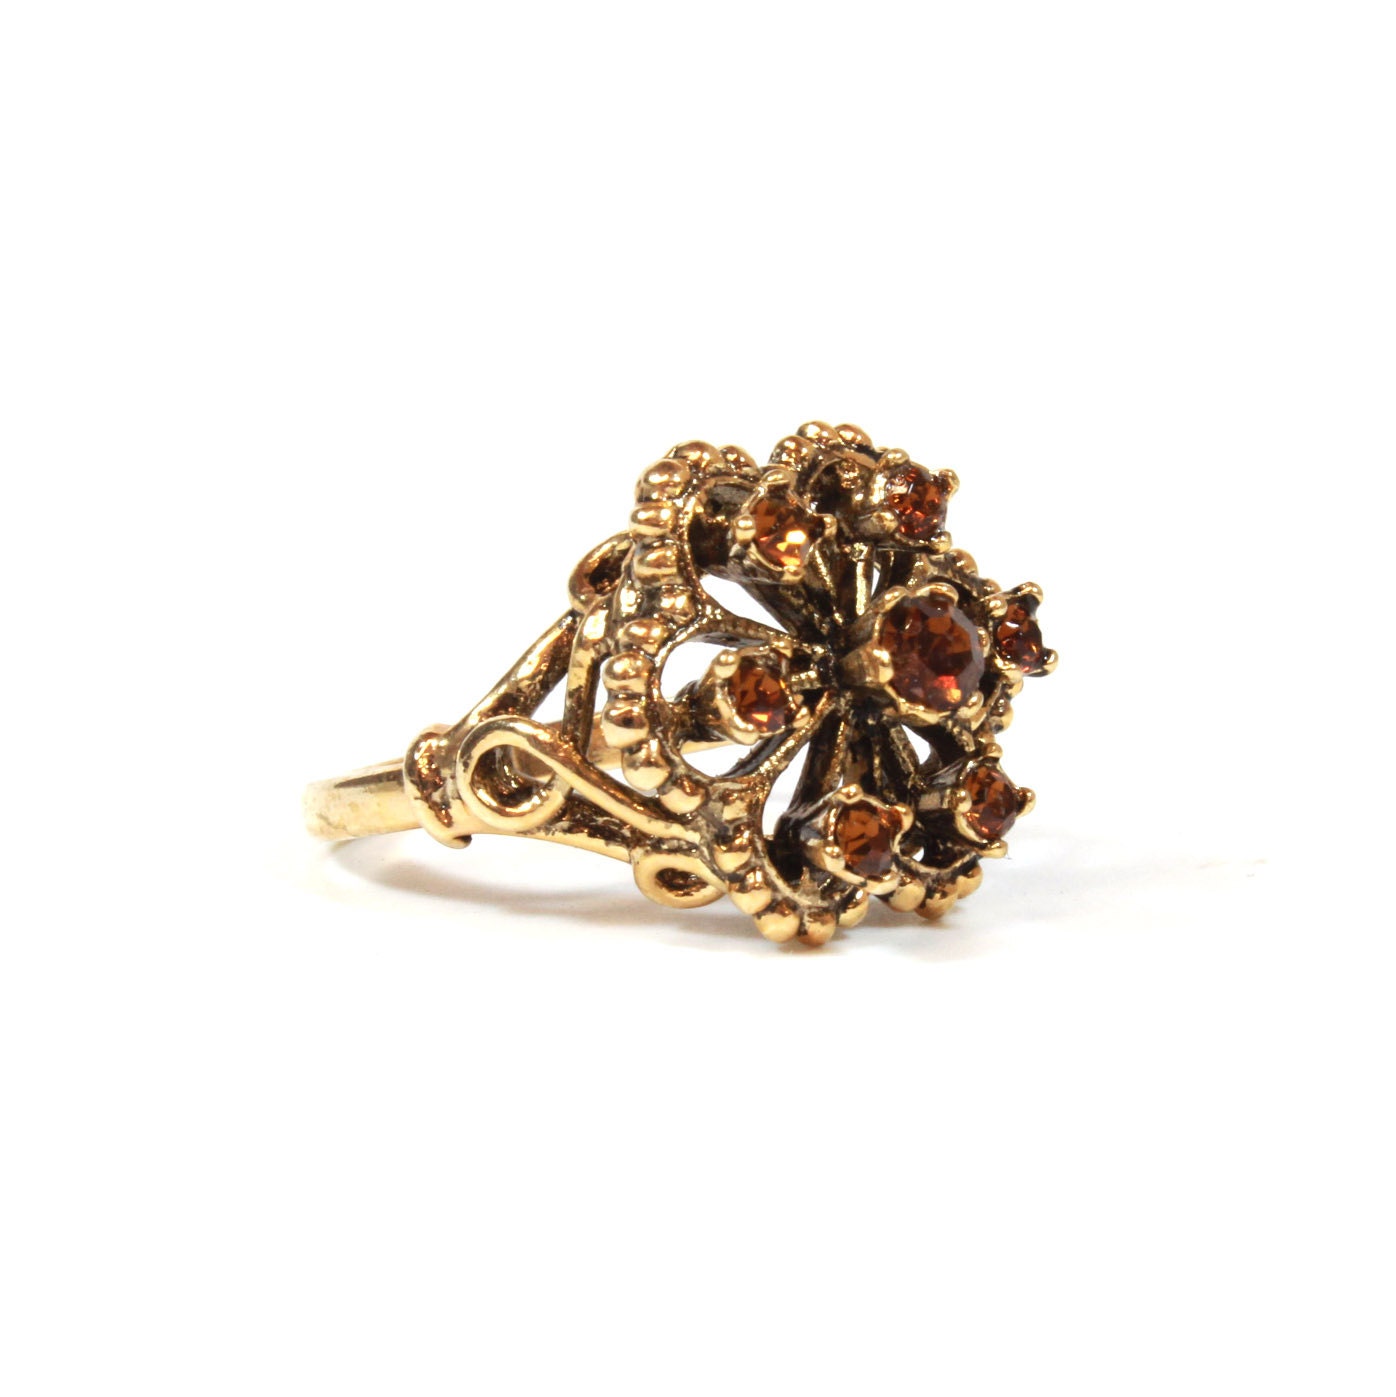 Vintage Ring Citrine Swarovski Crystals Filigree Style Antique 18k Gold Womans Jewelry #R103 - Limited Stock - Never Worn